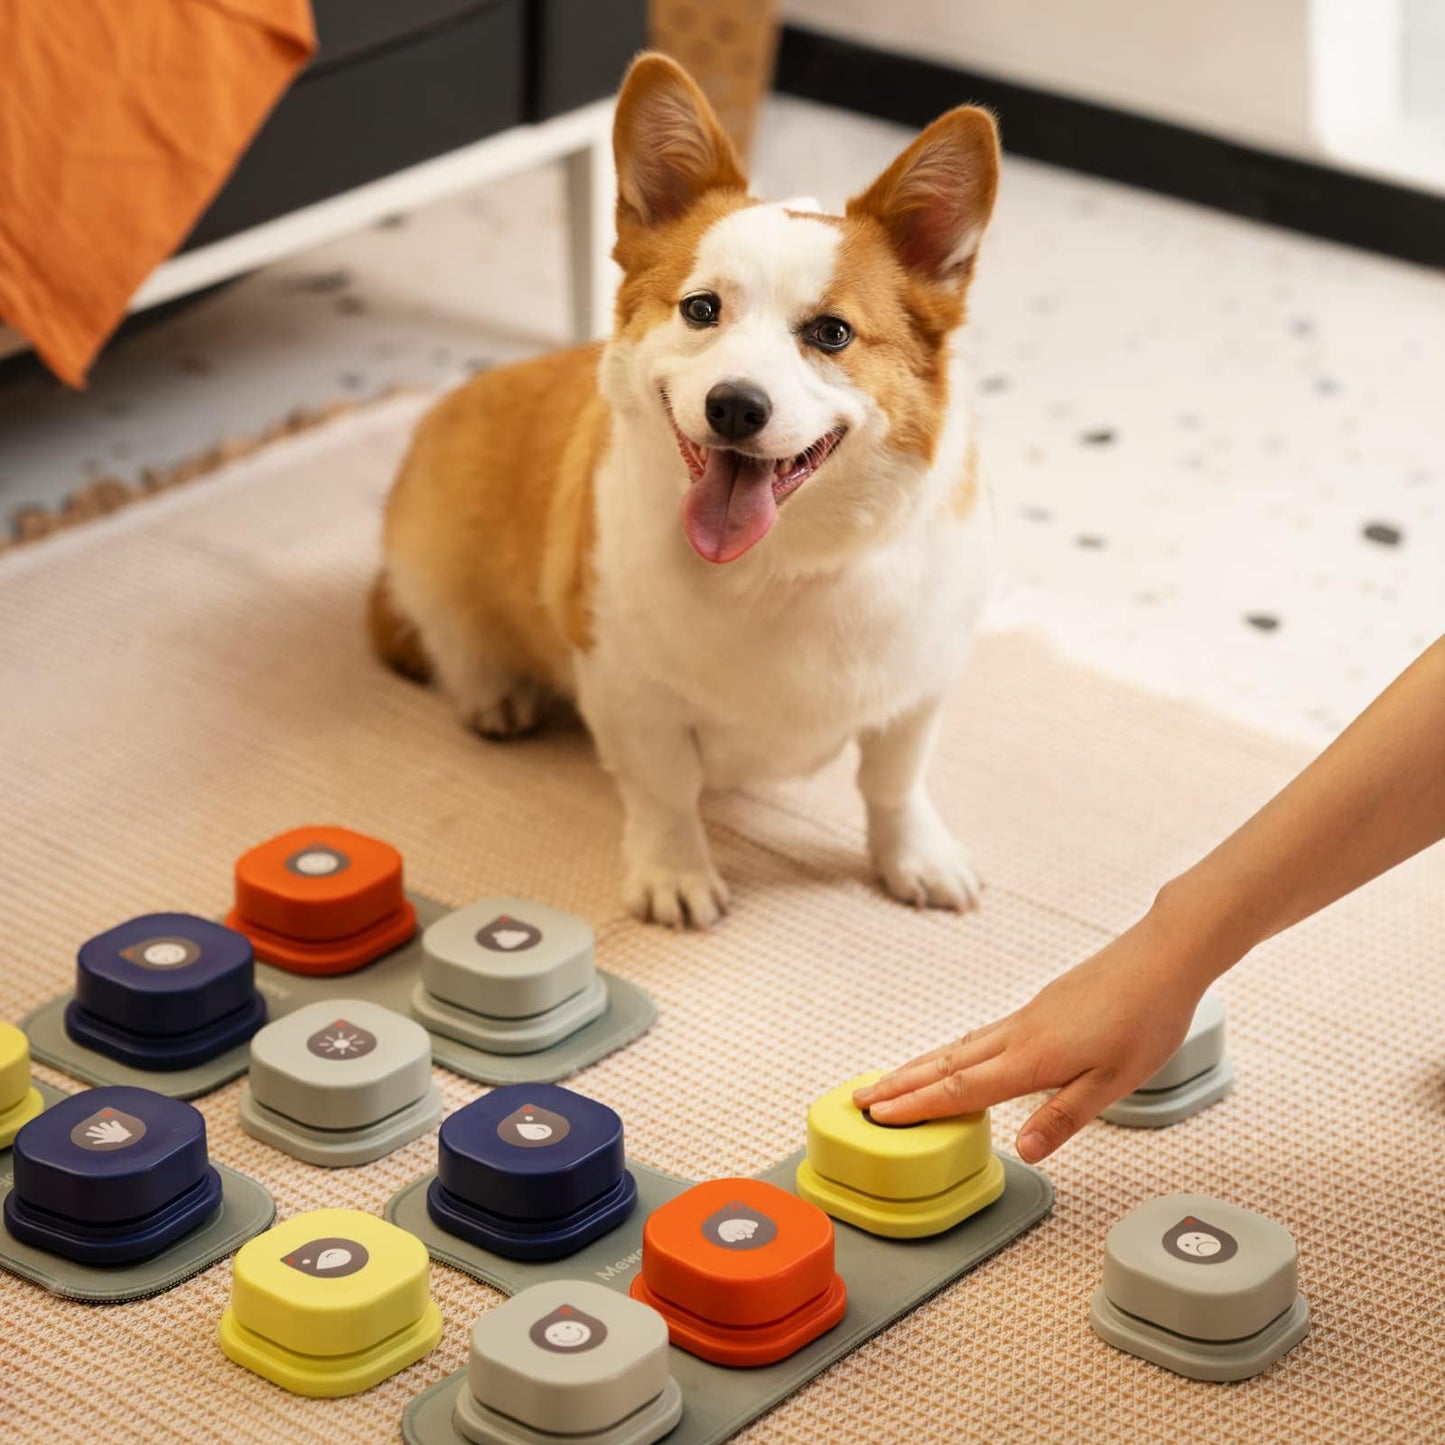 Dog Communication Starter Pack with Recordable Talking Buttons - Enhance Interaction and Training for Dogs with Mat & Stickers.